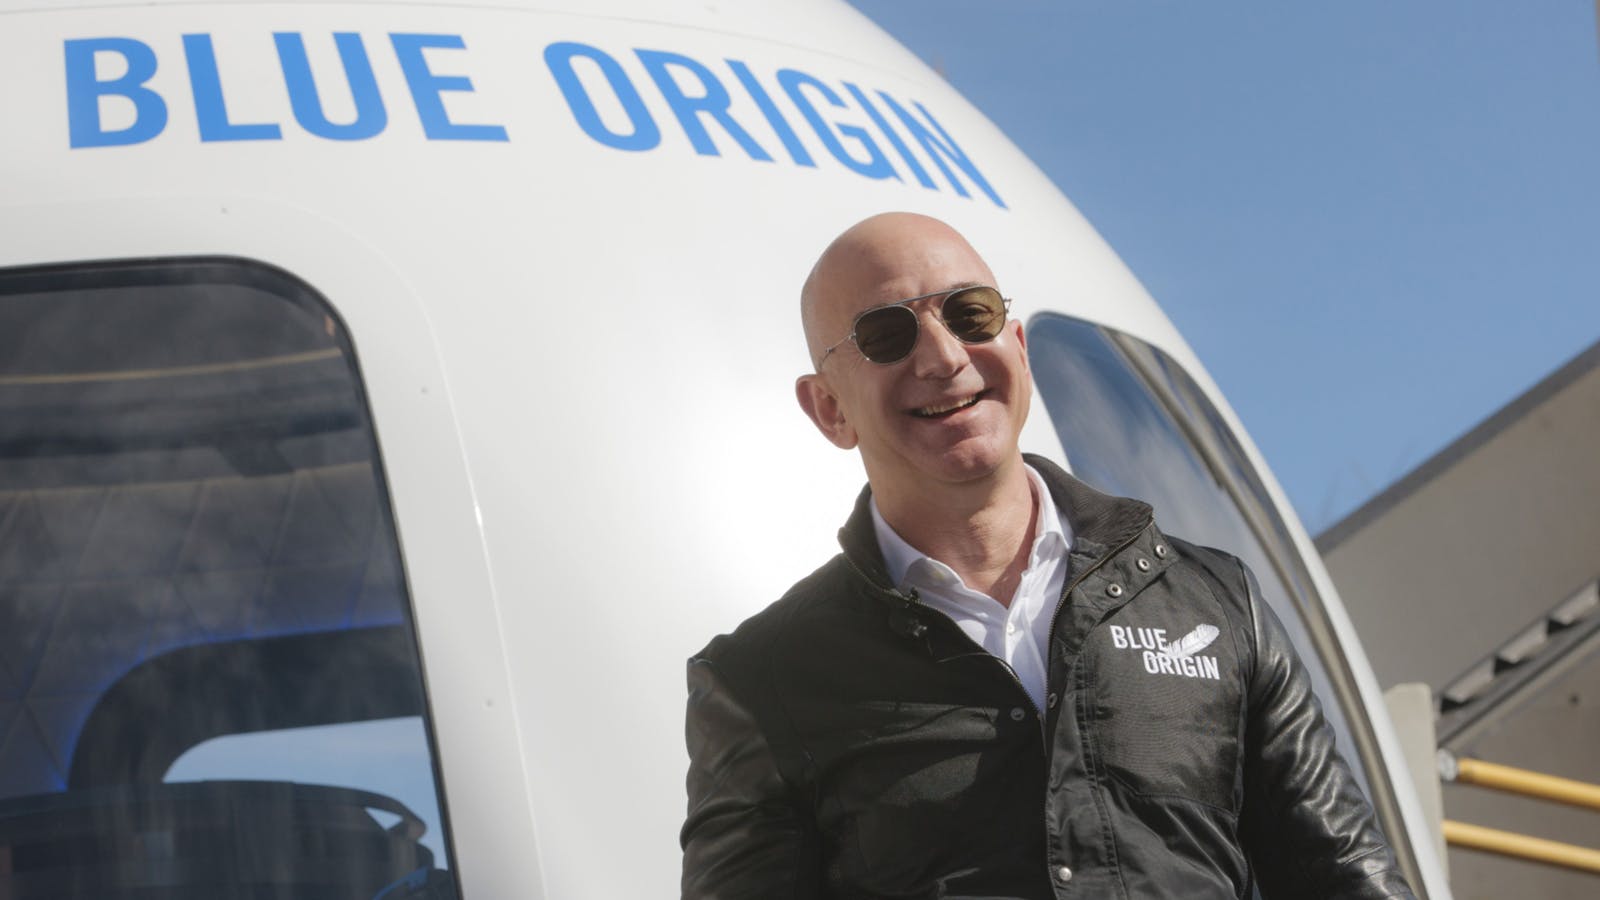 Jeff Bezos at a Blue Origin event in 2017. Photo by Bloomberg